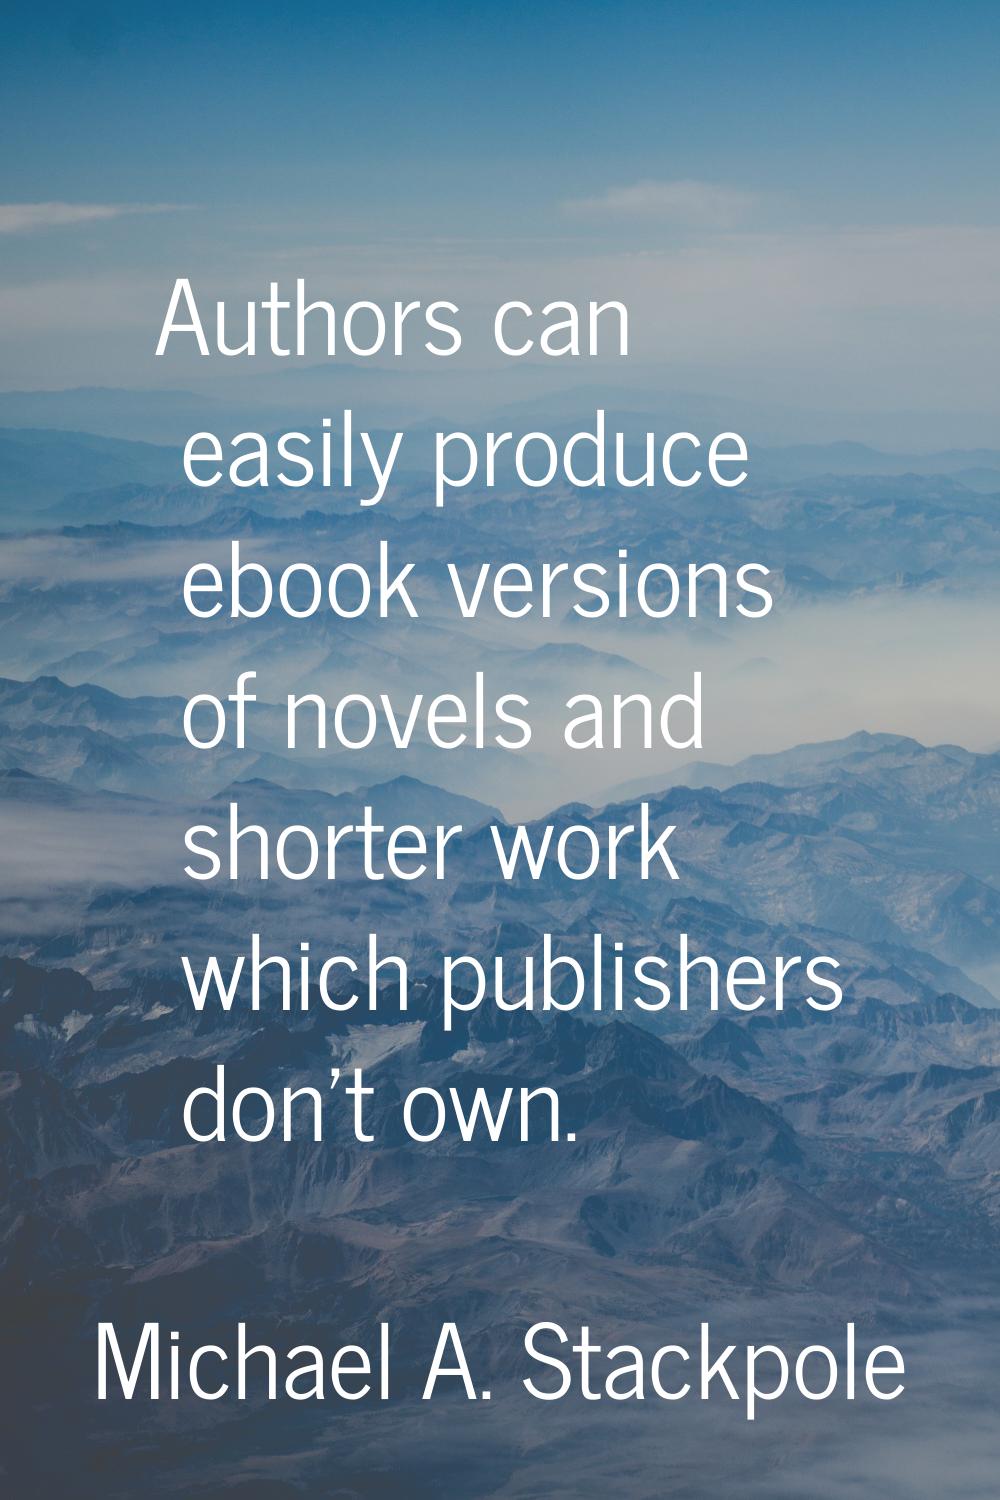 Authors can easily produce ebook versions of novels and shorter work which publishers don't own.